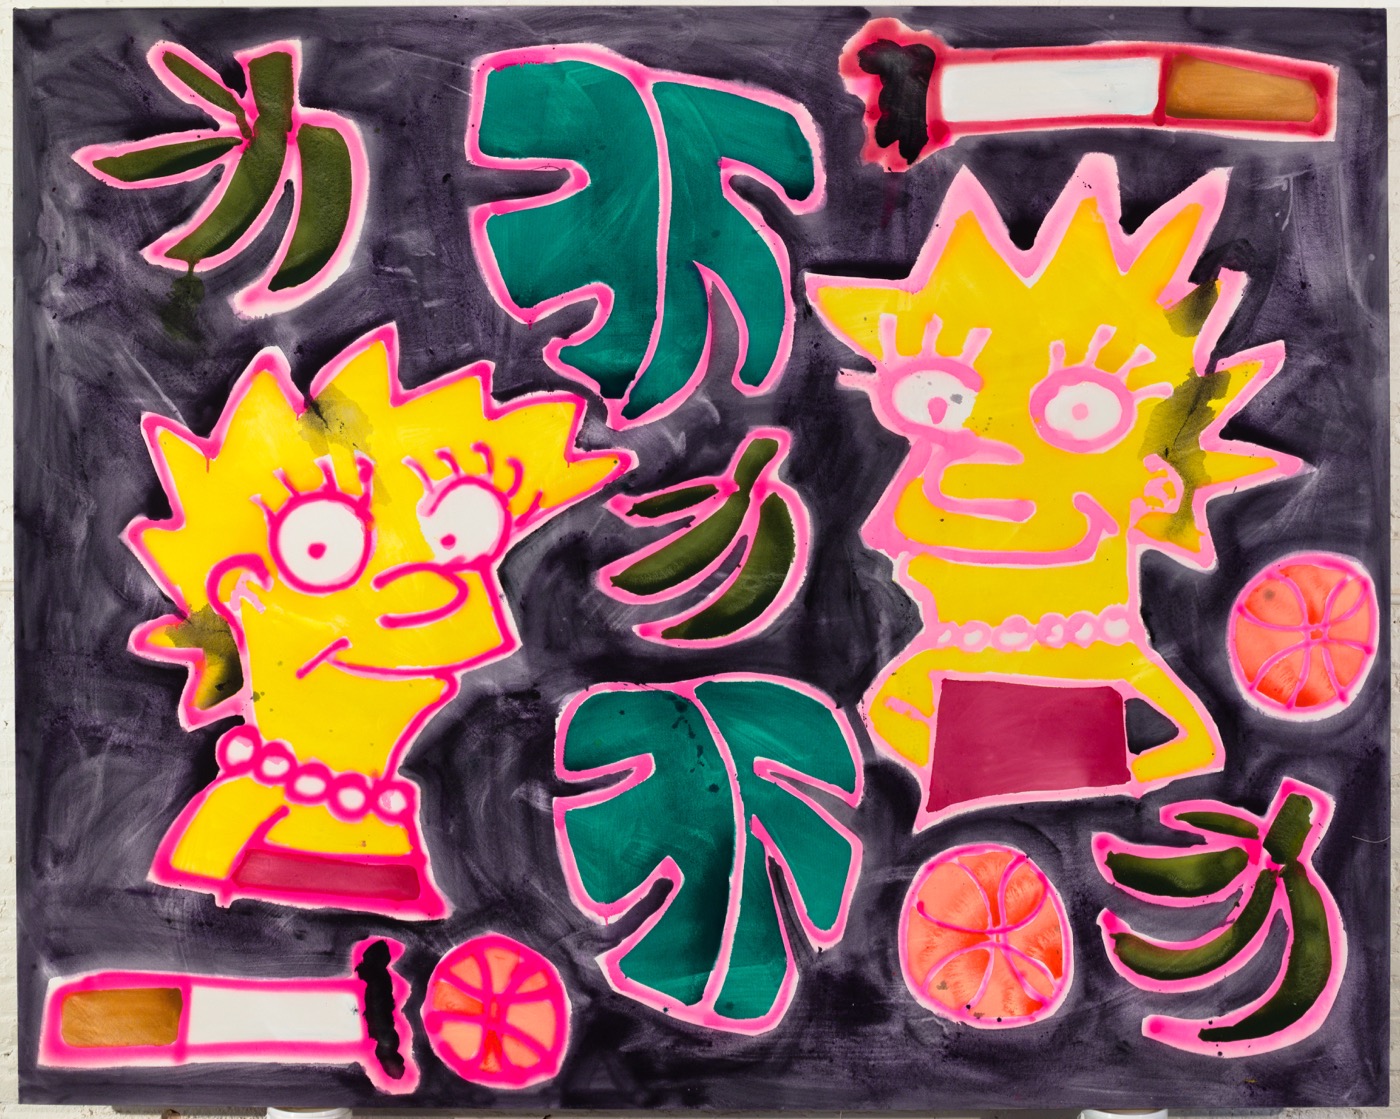 Katherine Bernhardt "Two Simpsons, Plantains, Basketballs, Cigarettes" (2016) Acrylic and spray paint on canvas 96 x 120 in.